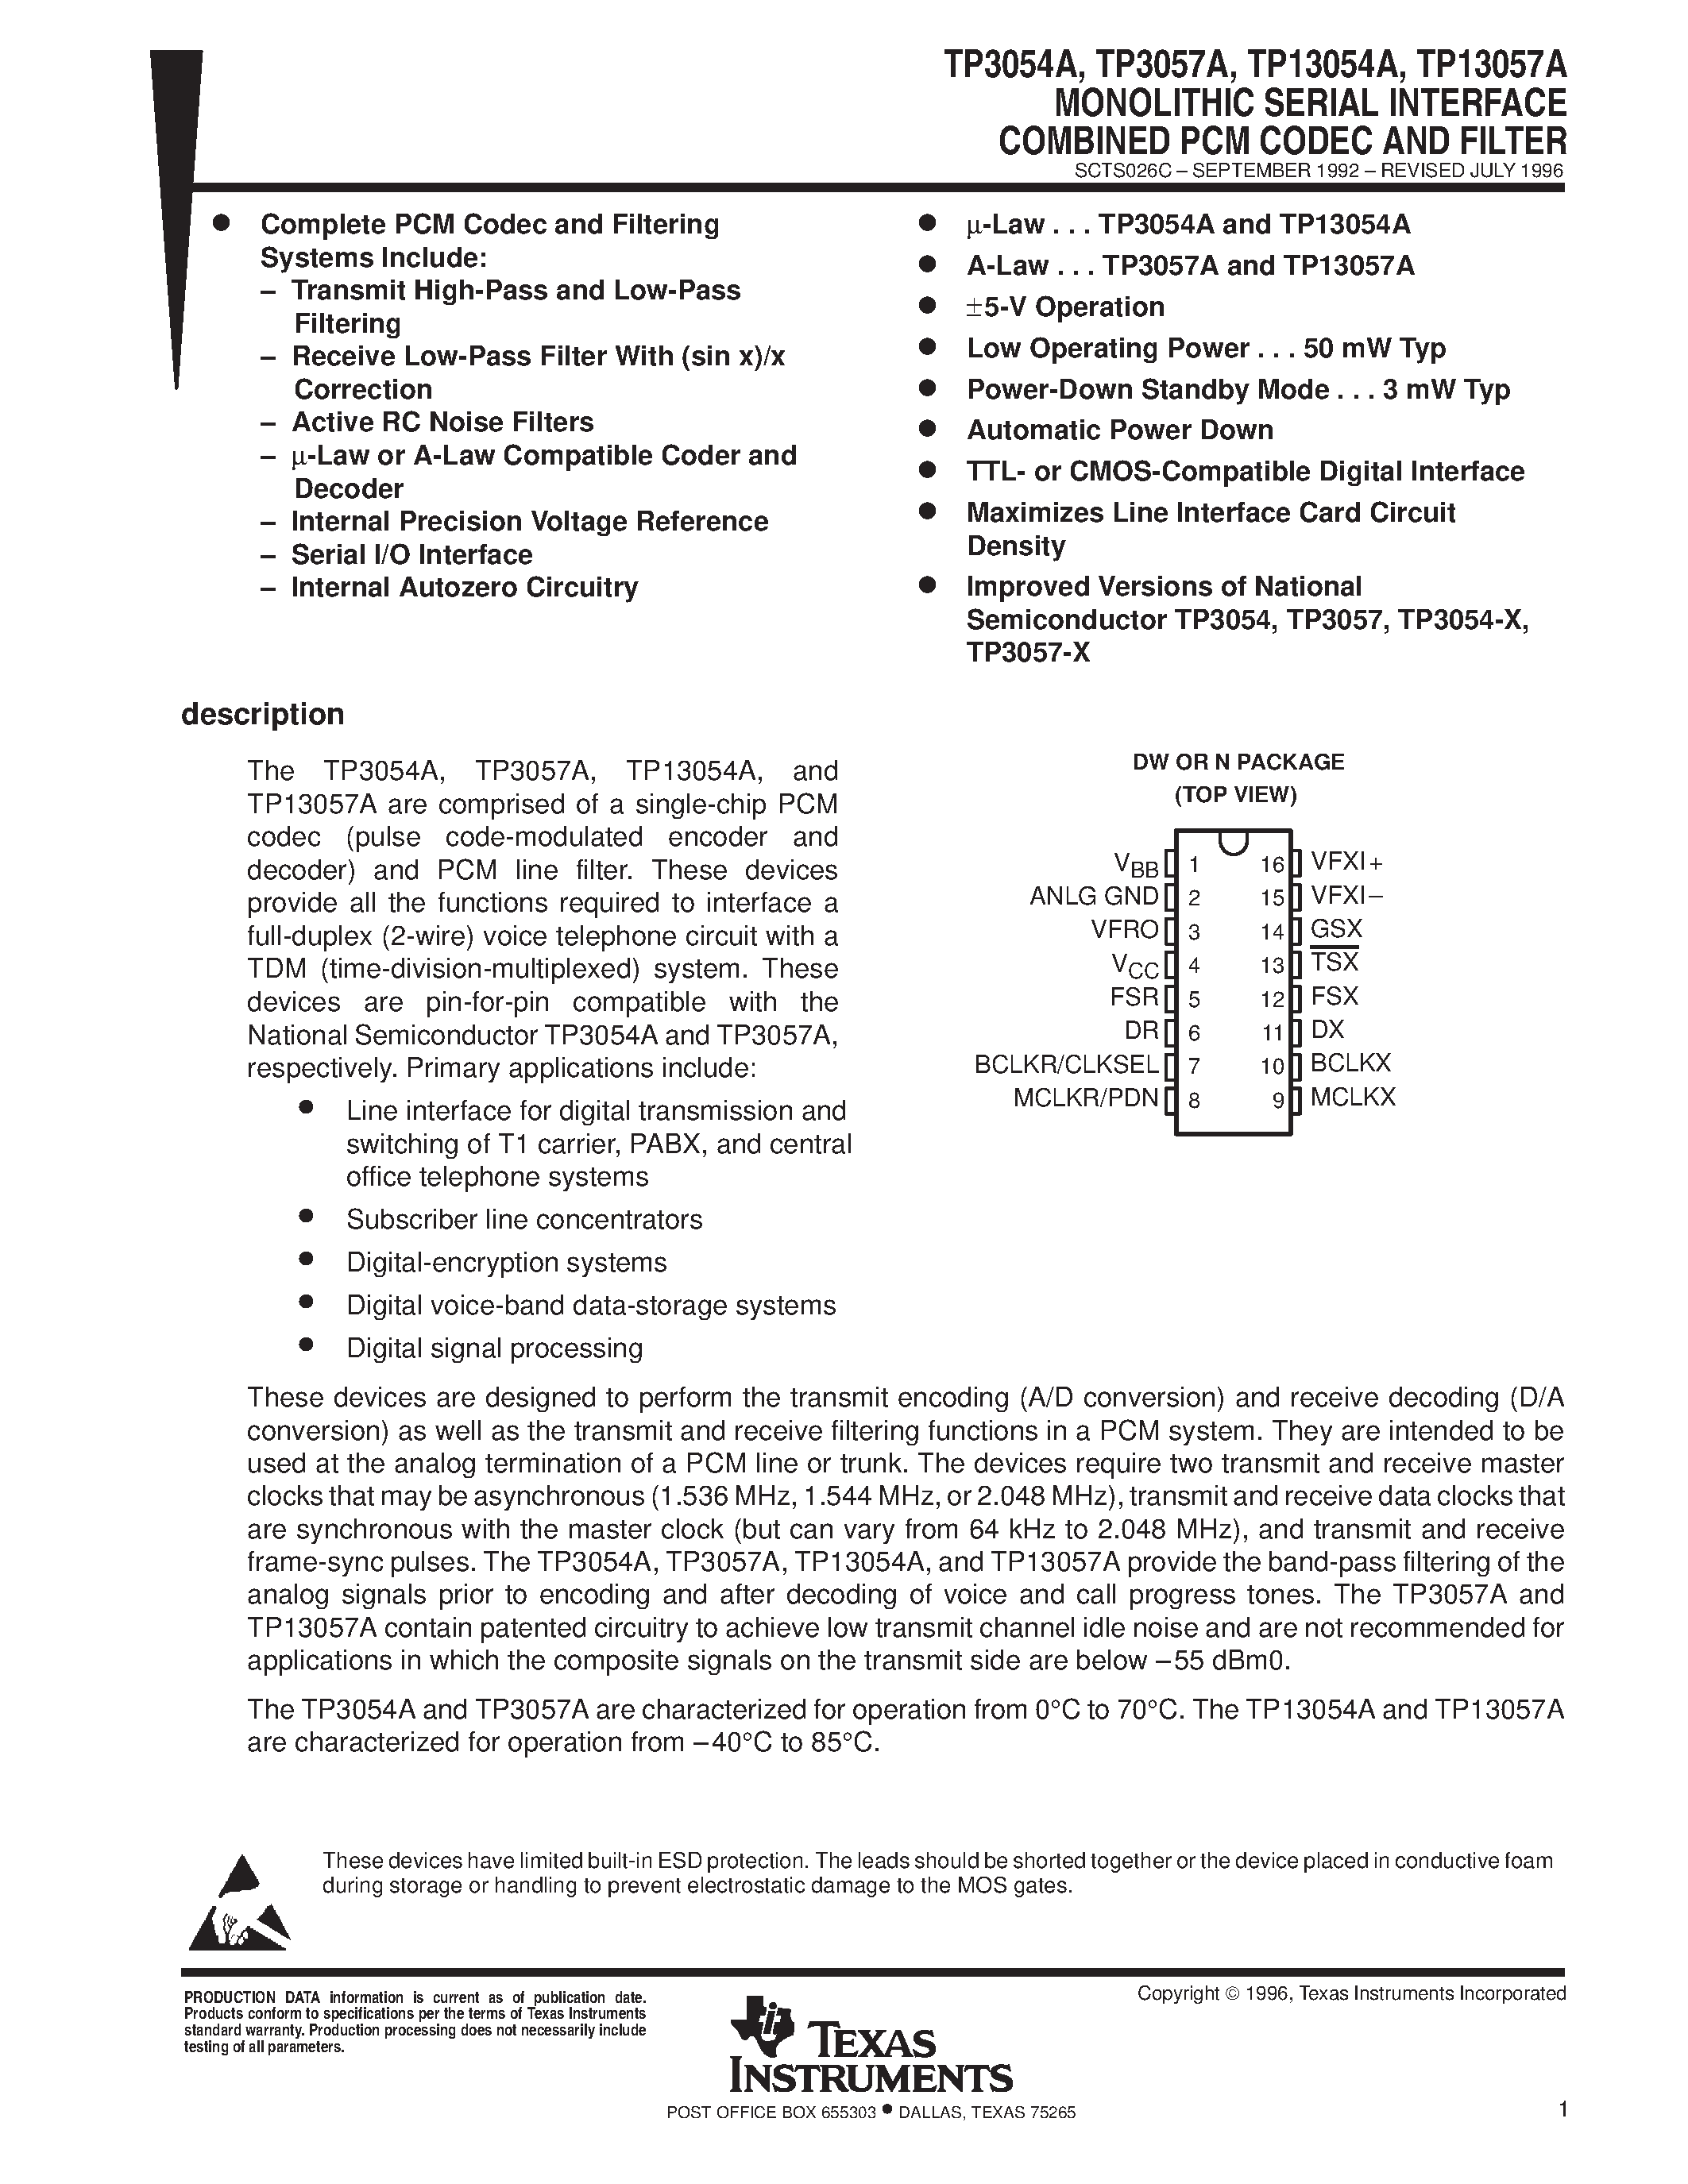 Datasheet TP13057A - MONOLITHIC SERIAL INTERFACE COMBINED PCM CODEC AND FILTER page 1